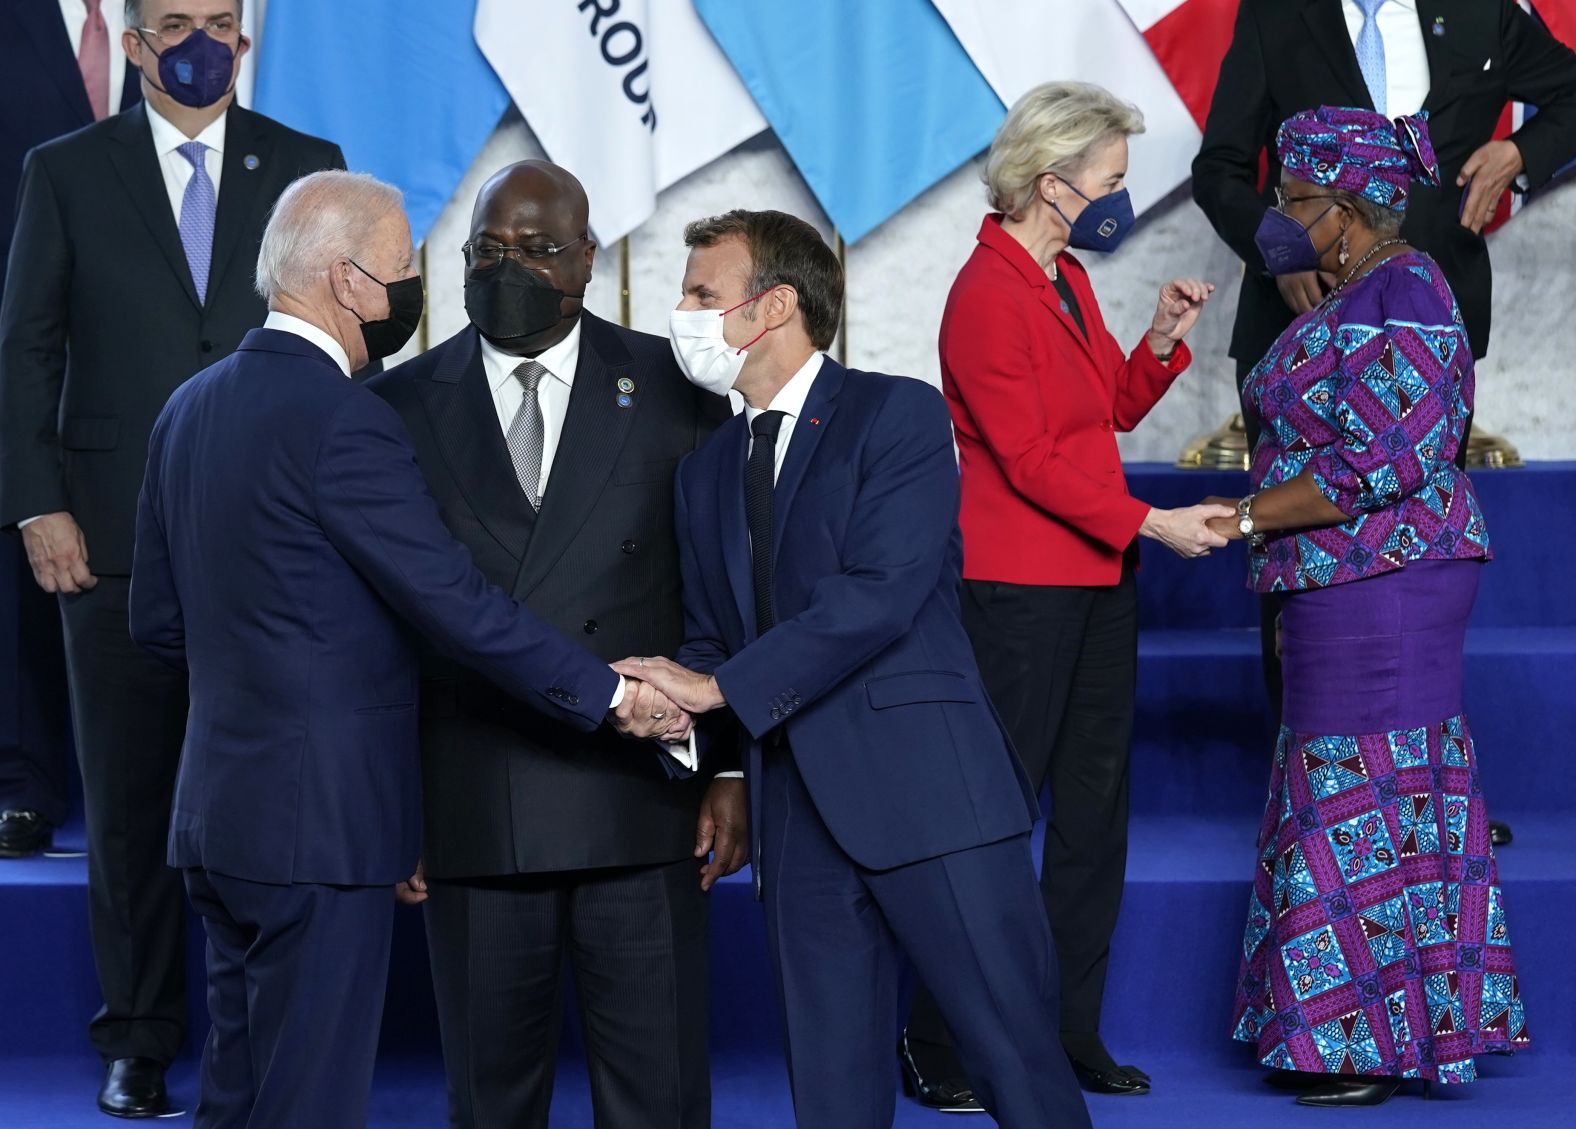 Biden greets Macron at the group photo. Between them is Felix Tshisekedi, who is President of the Democratic Republic of Congo and also chairman of the African Union. On the right, European Commission President Ursula von der Leyen is speaking with World Trade Organization Director-General Ngozi Okonjo-Iweala.